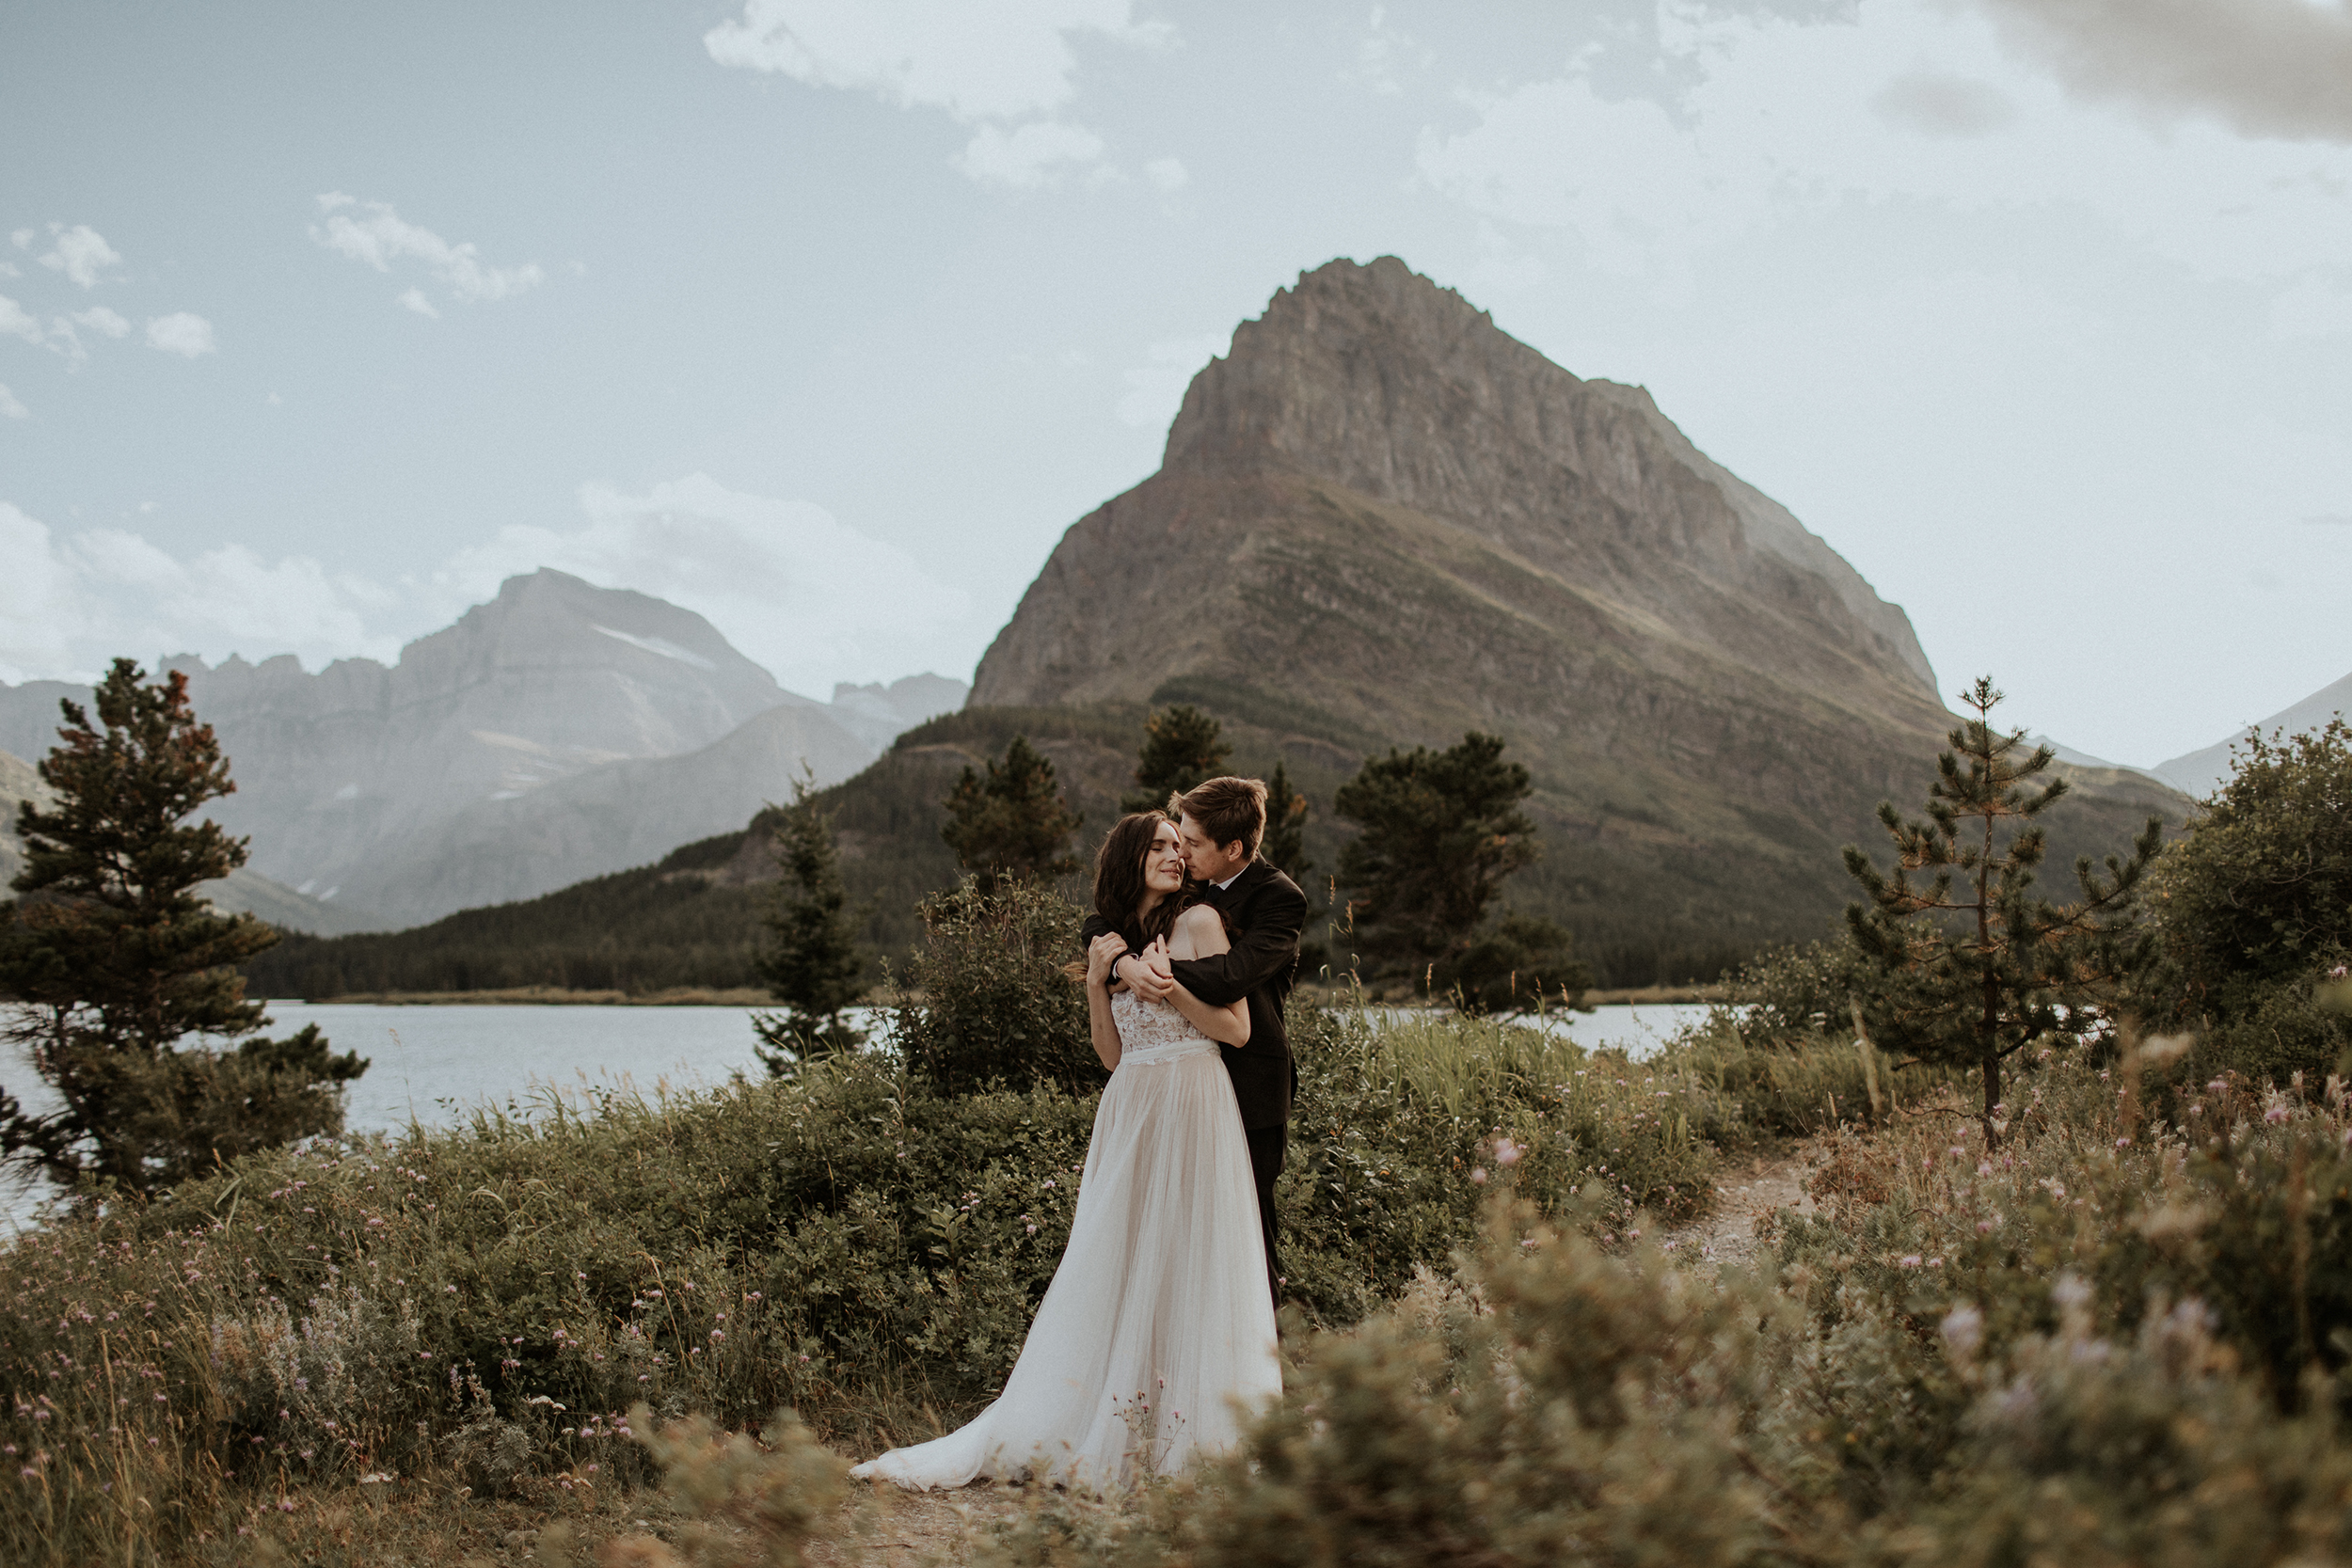 When to get married in Glacier National Park